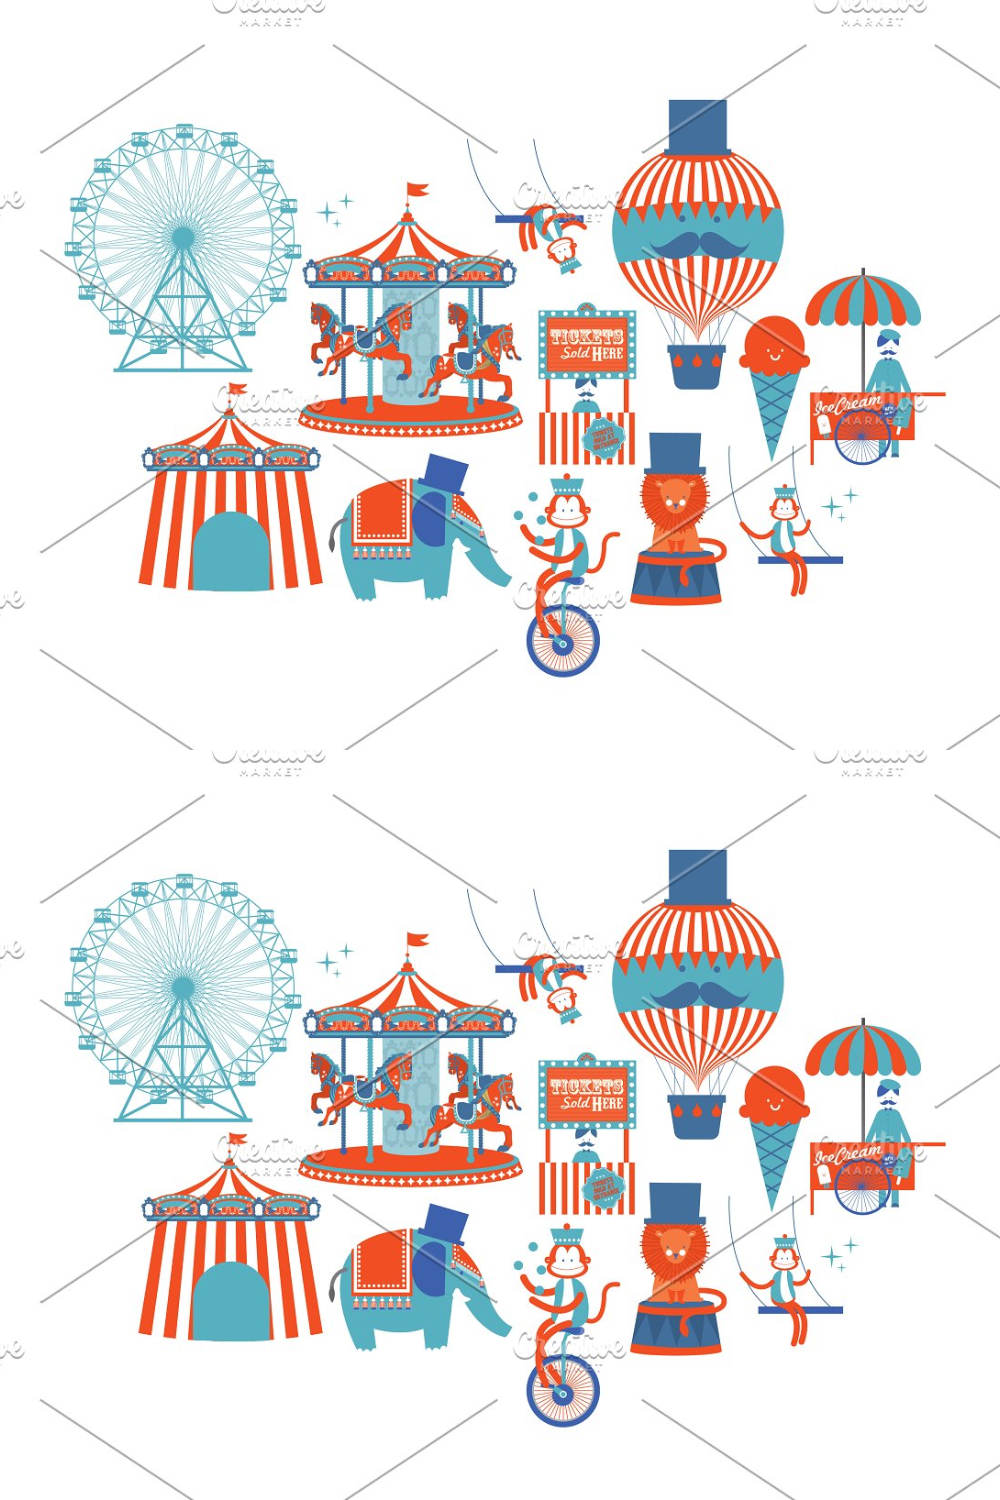 Circus Is In Town - Pinterest.